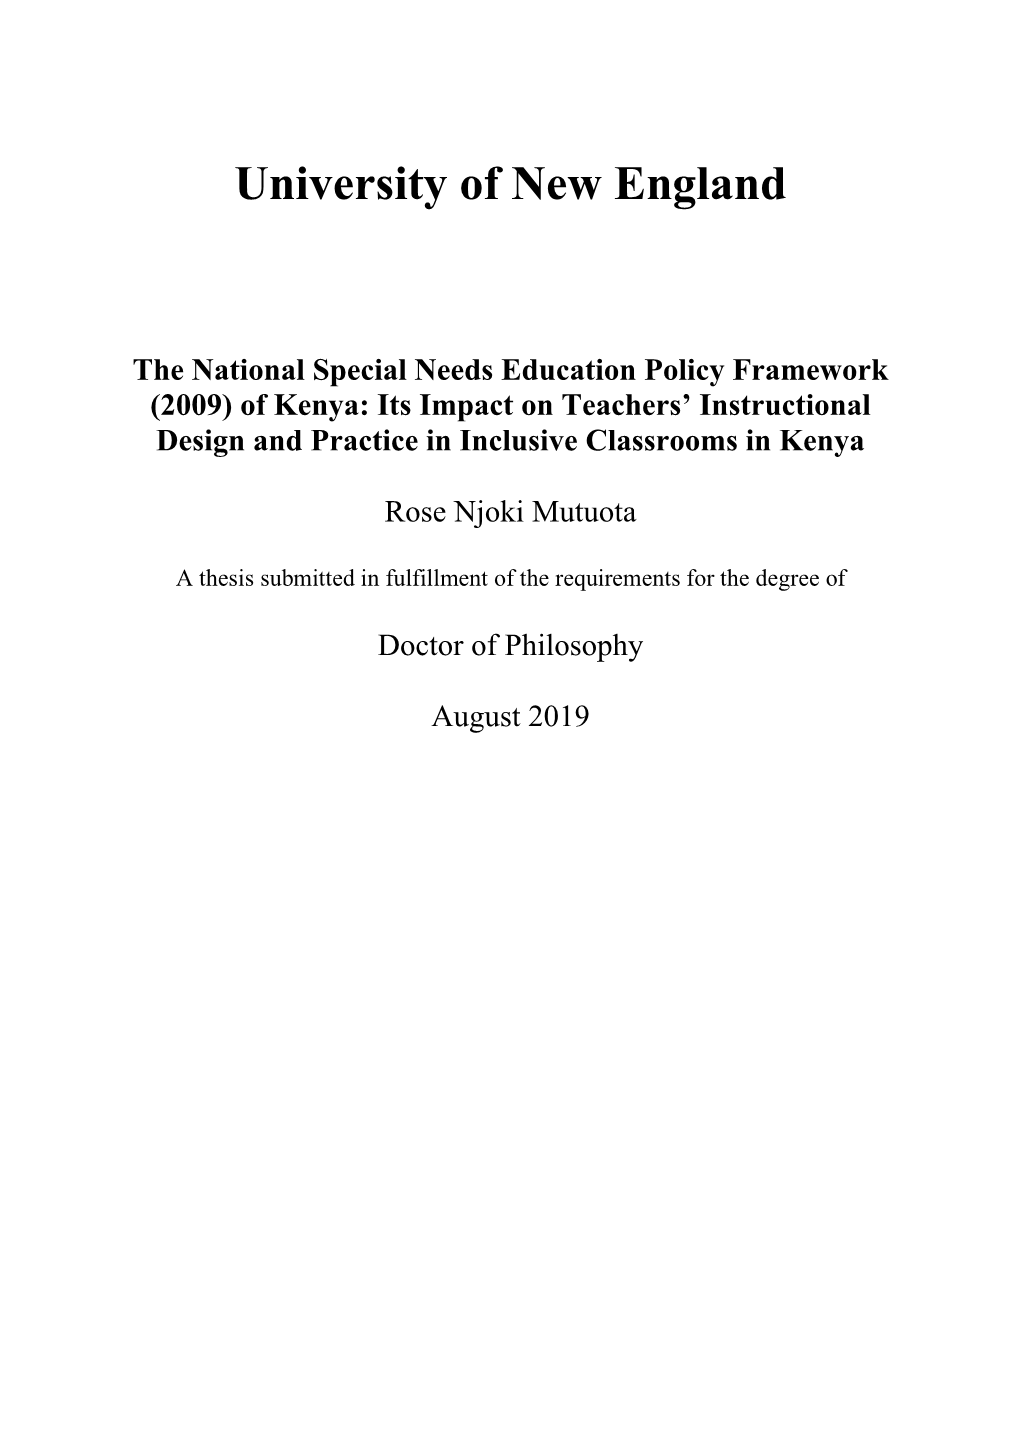 Of Kenya: Its Impact on Teachers’ Instructional Design and Practice in Inclusive Classrooms in Kenya